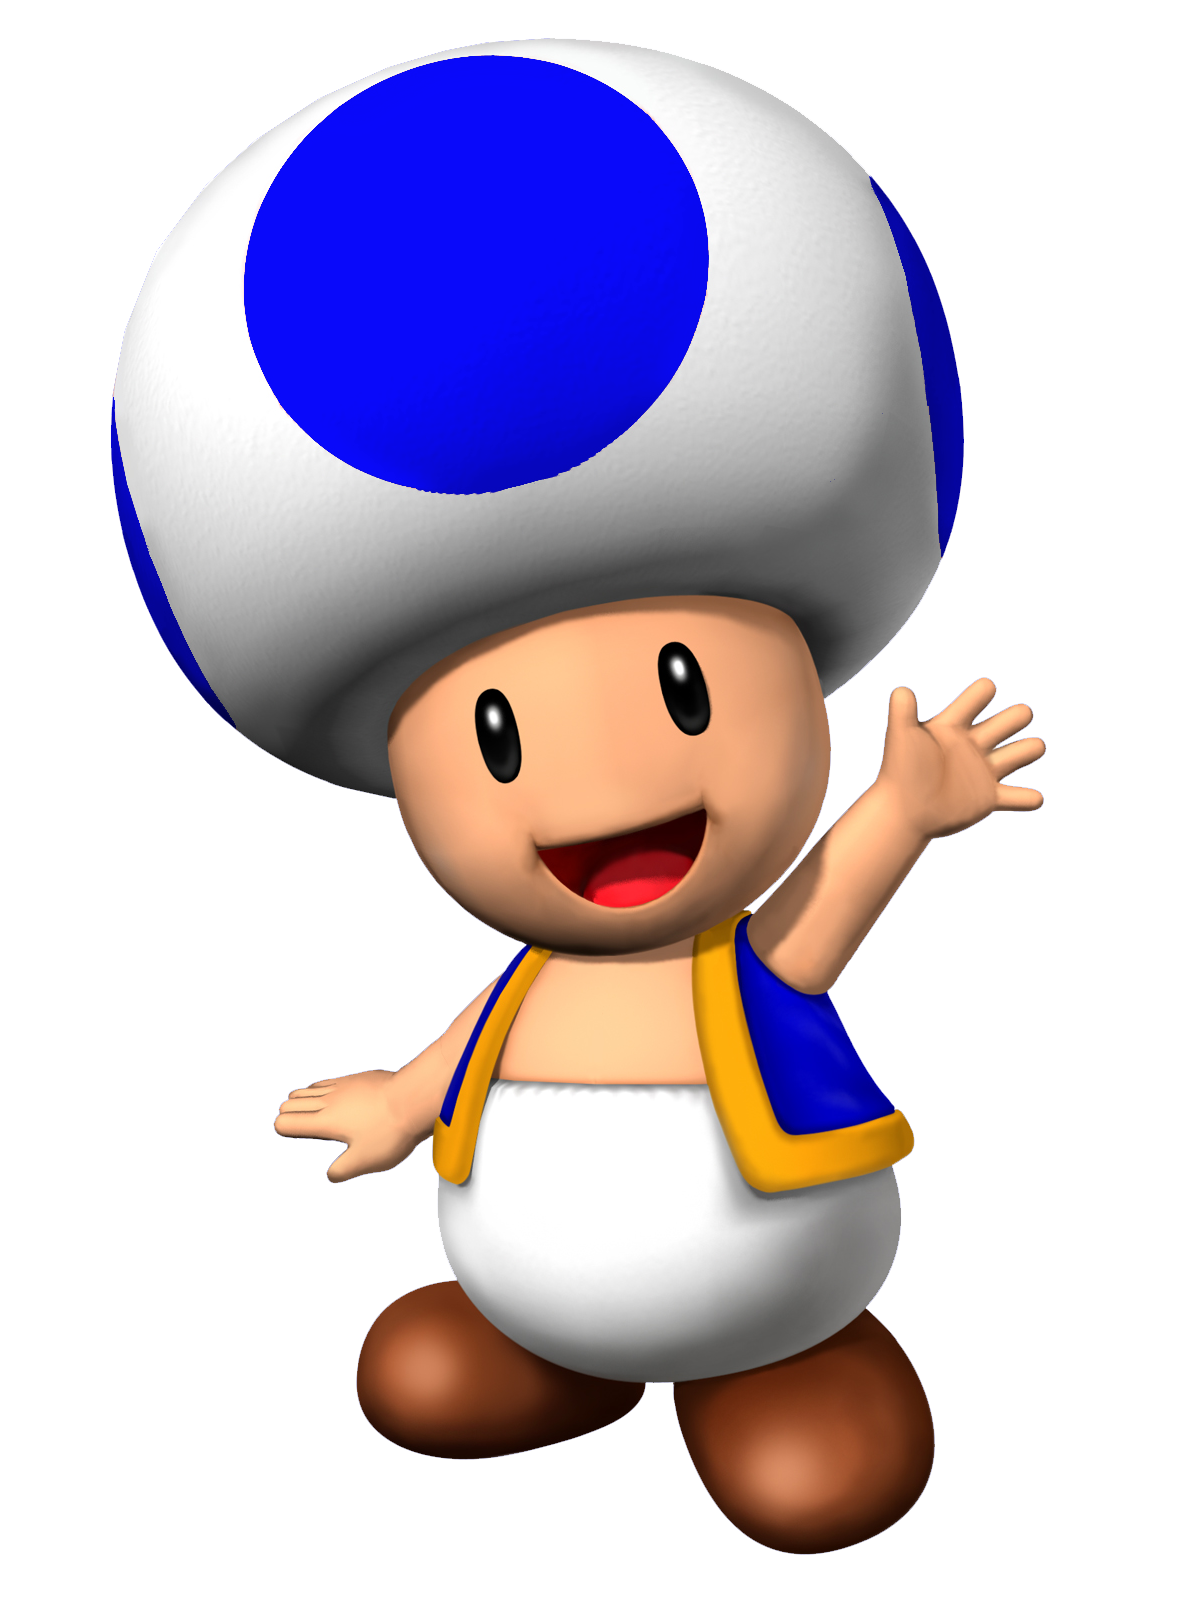 Toad (character) - MarioWiki, the encyclopedia of everything Mario